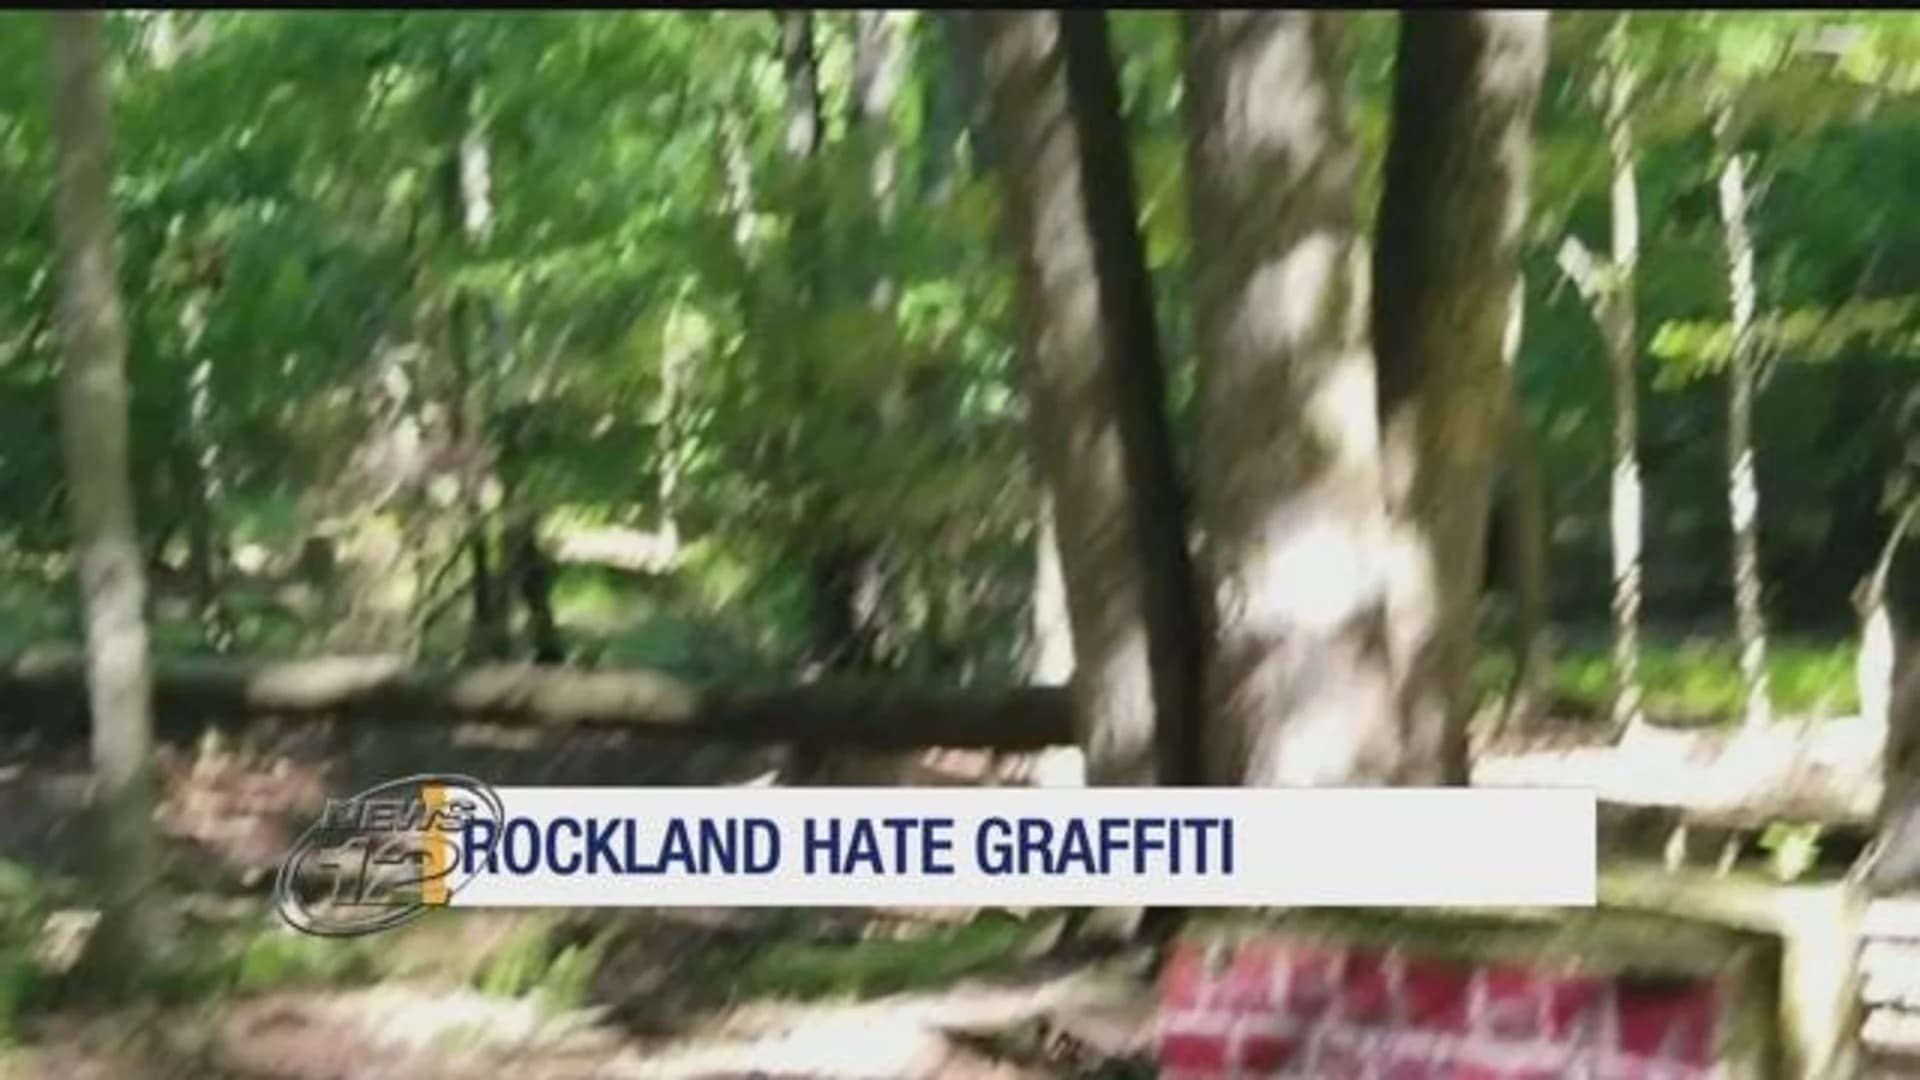 Officials: Anti-LGBT graffiti discovered at state park